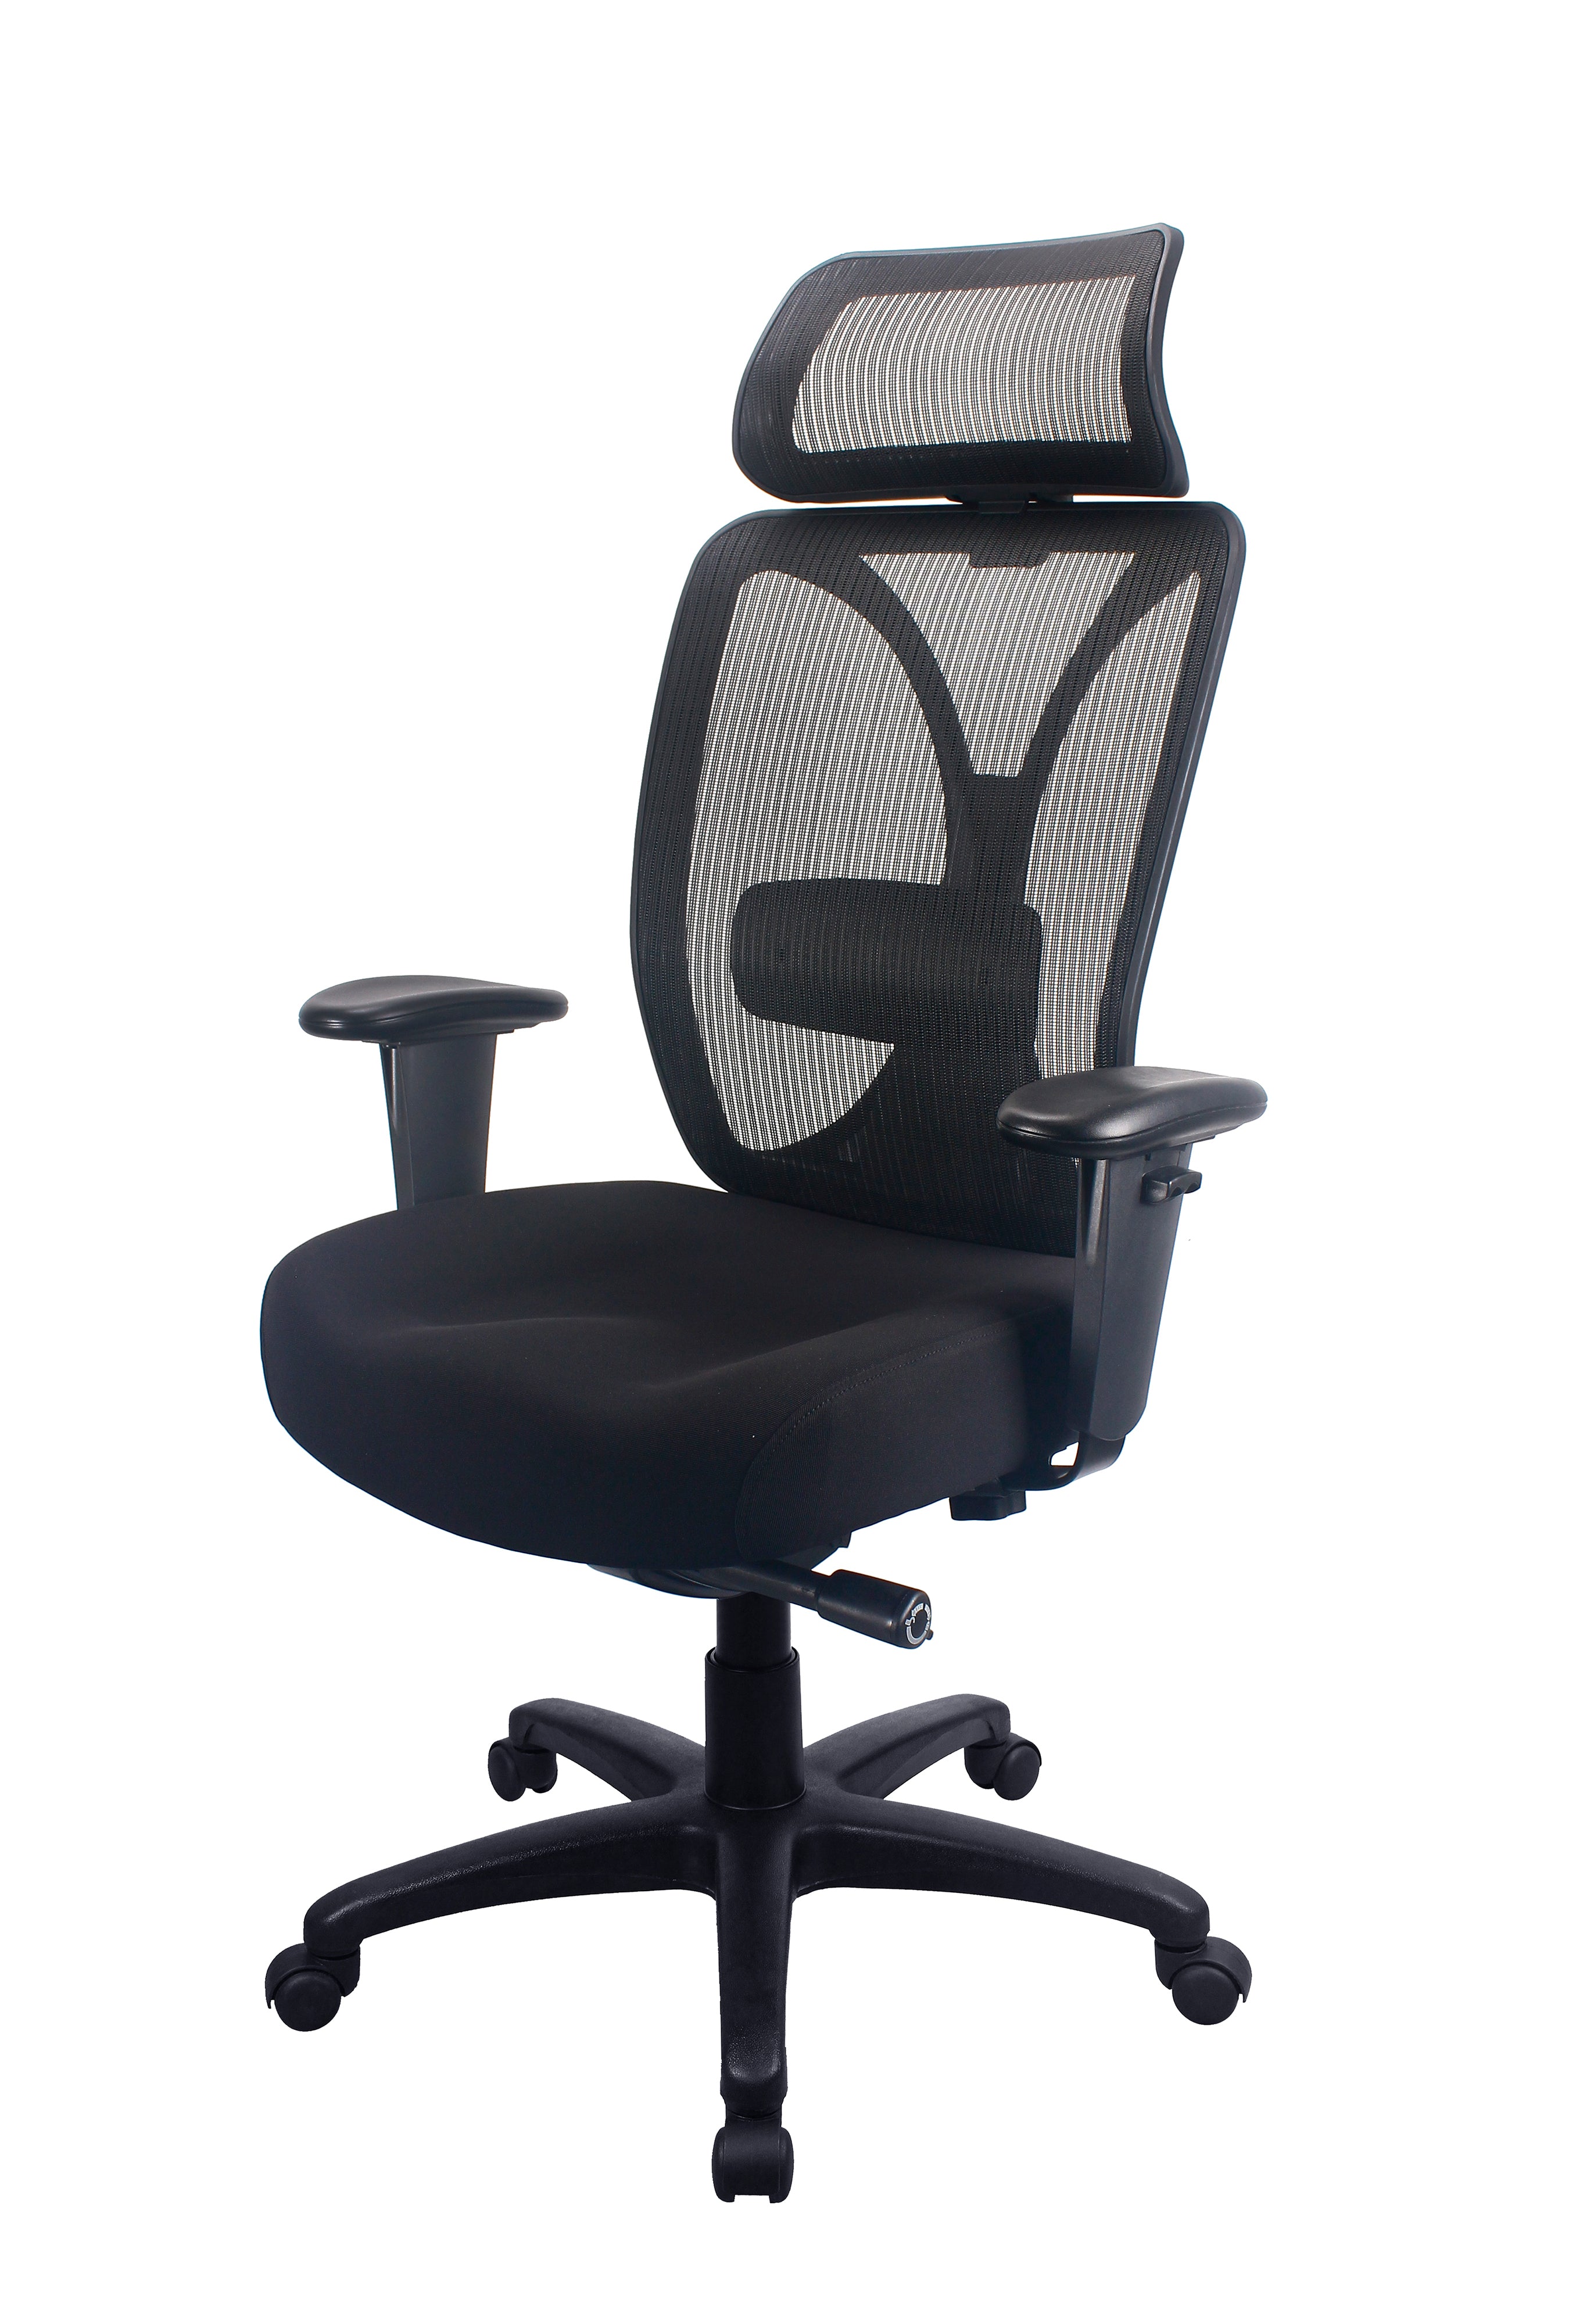 TEMPUR®-6450 Office Chair: The Ultimate in Executive Comfort